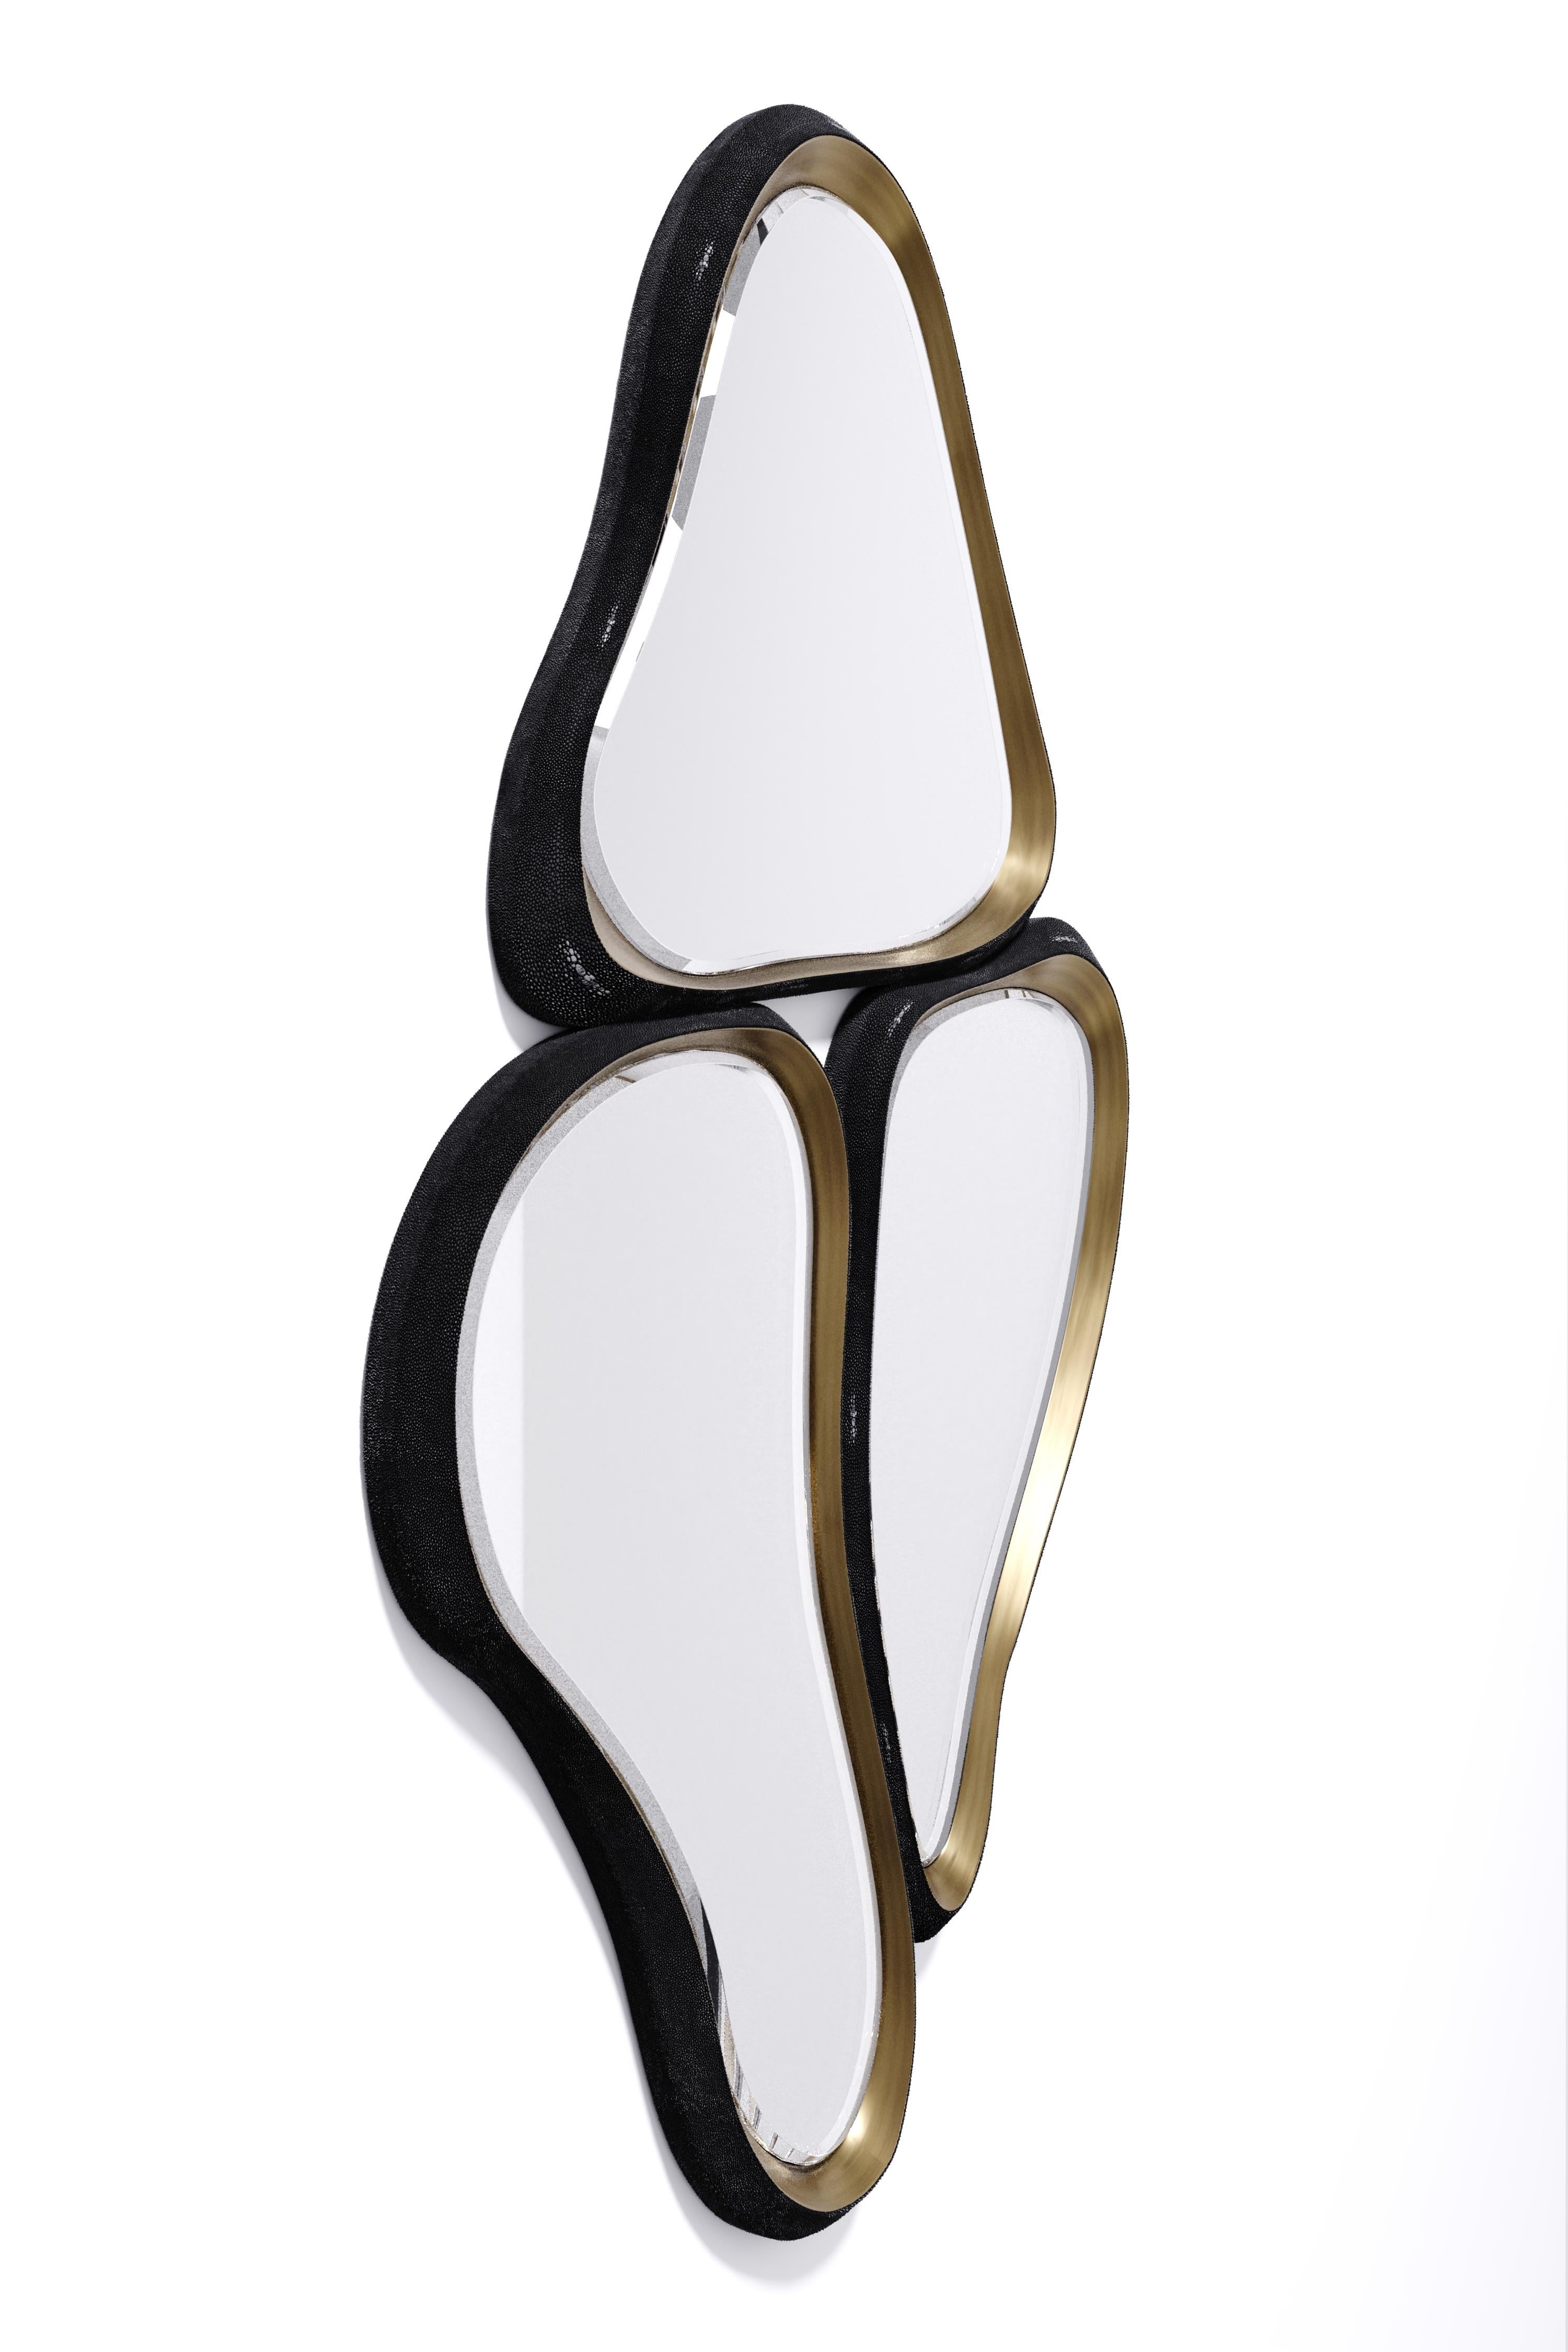 Sculptural Mirror in Cream Shagreen and Bronze-Patina Brass by Kifu Paris For Sale 3